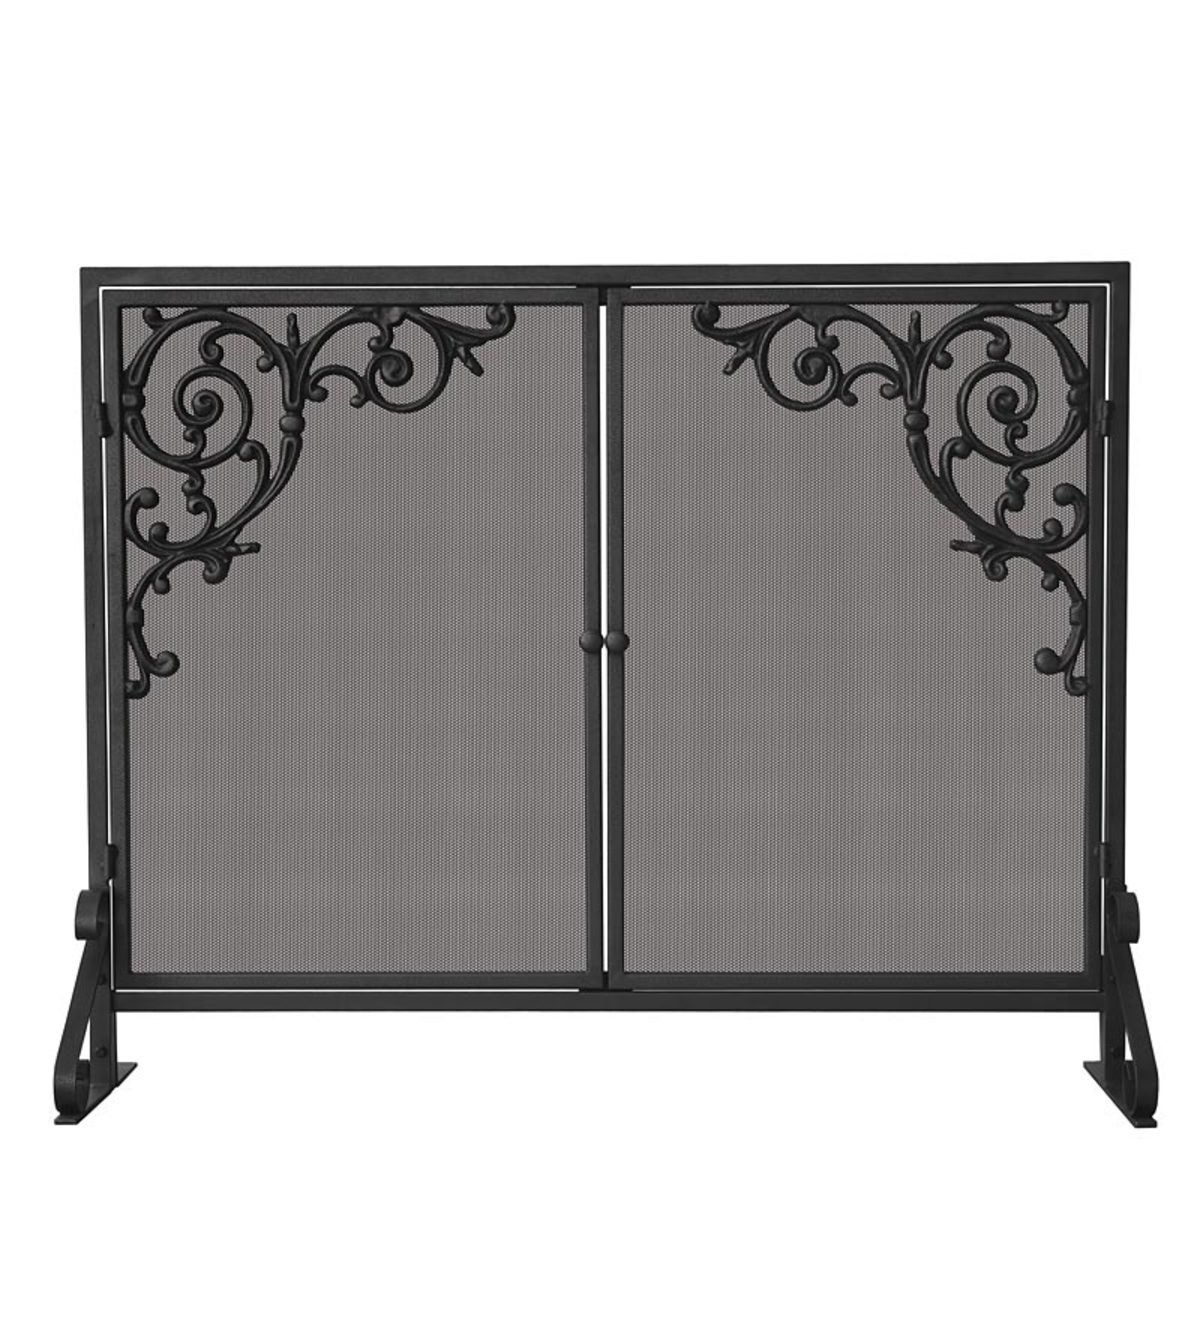 Olde World Single Panel Fireplace Screen with Doors and Cast Scrolls